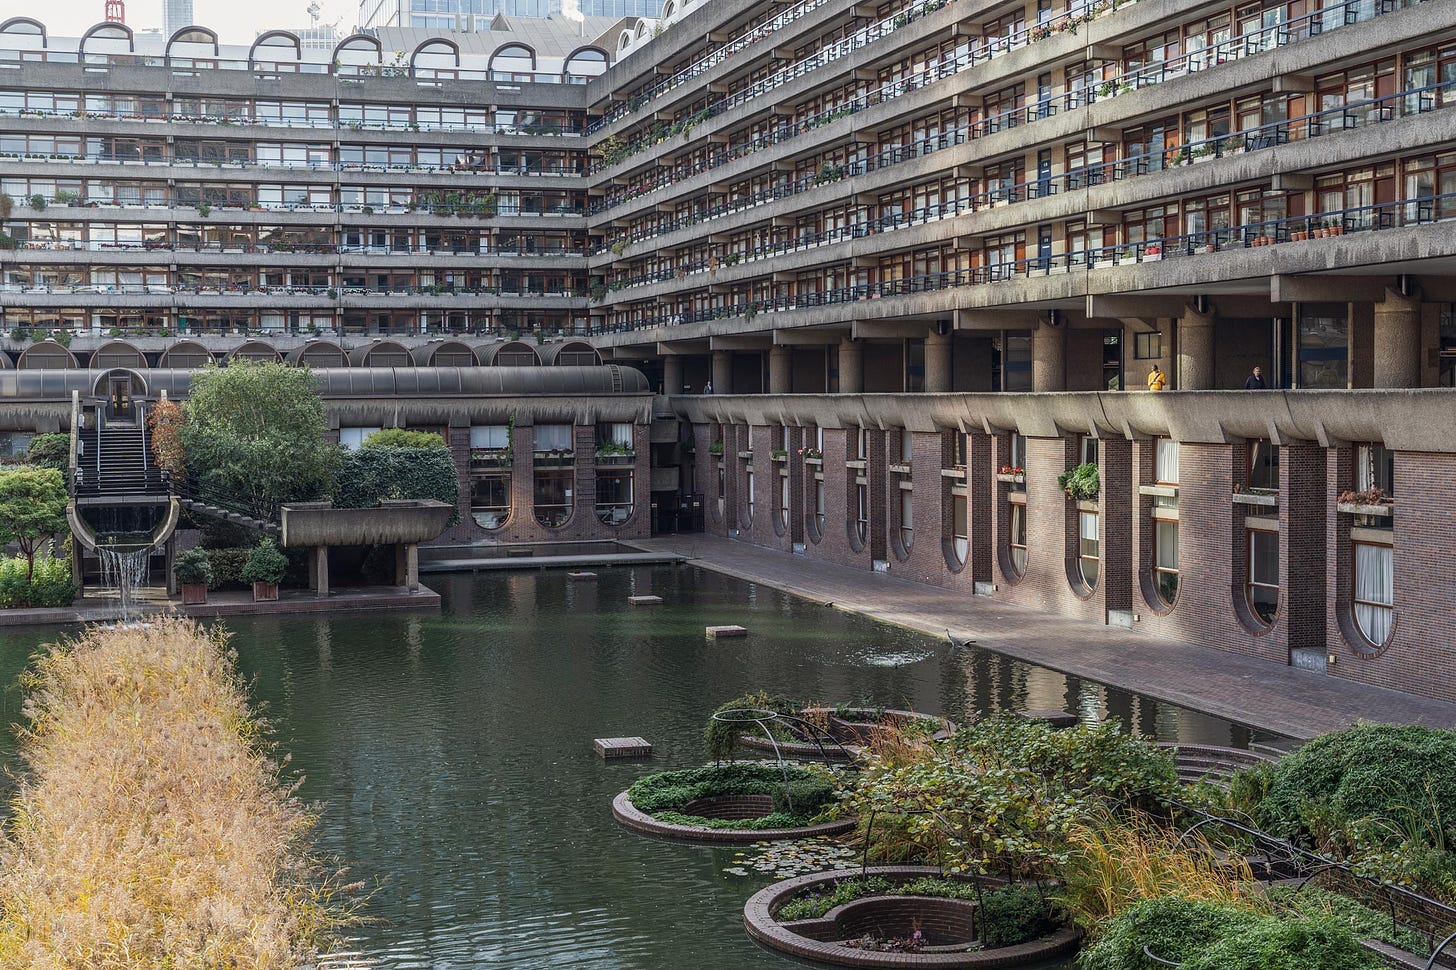 The Brutalist Architecture of the Barbican Centre - soonafternoon